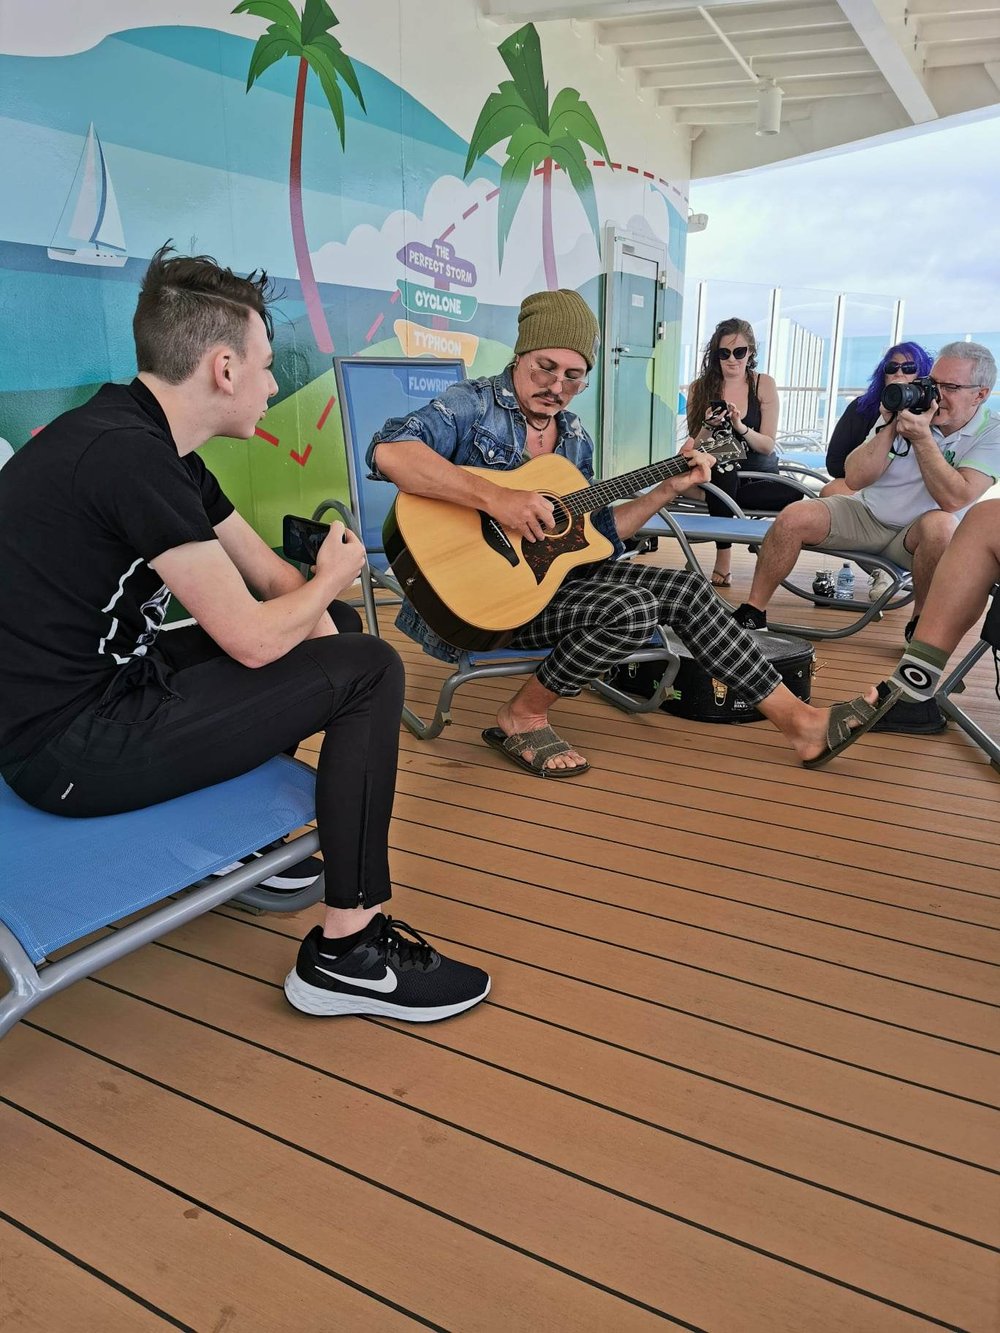  With an impromptu acoustic set on the deck 